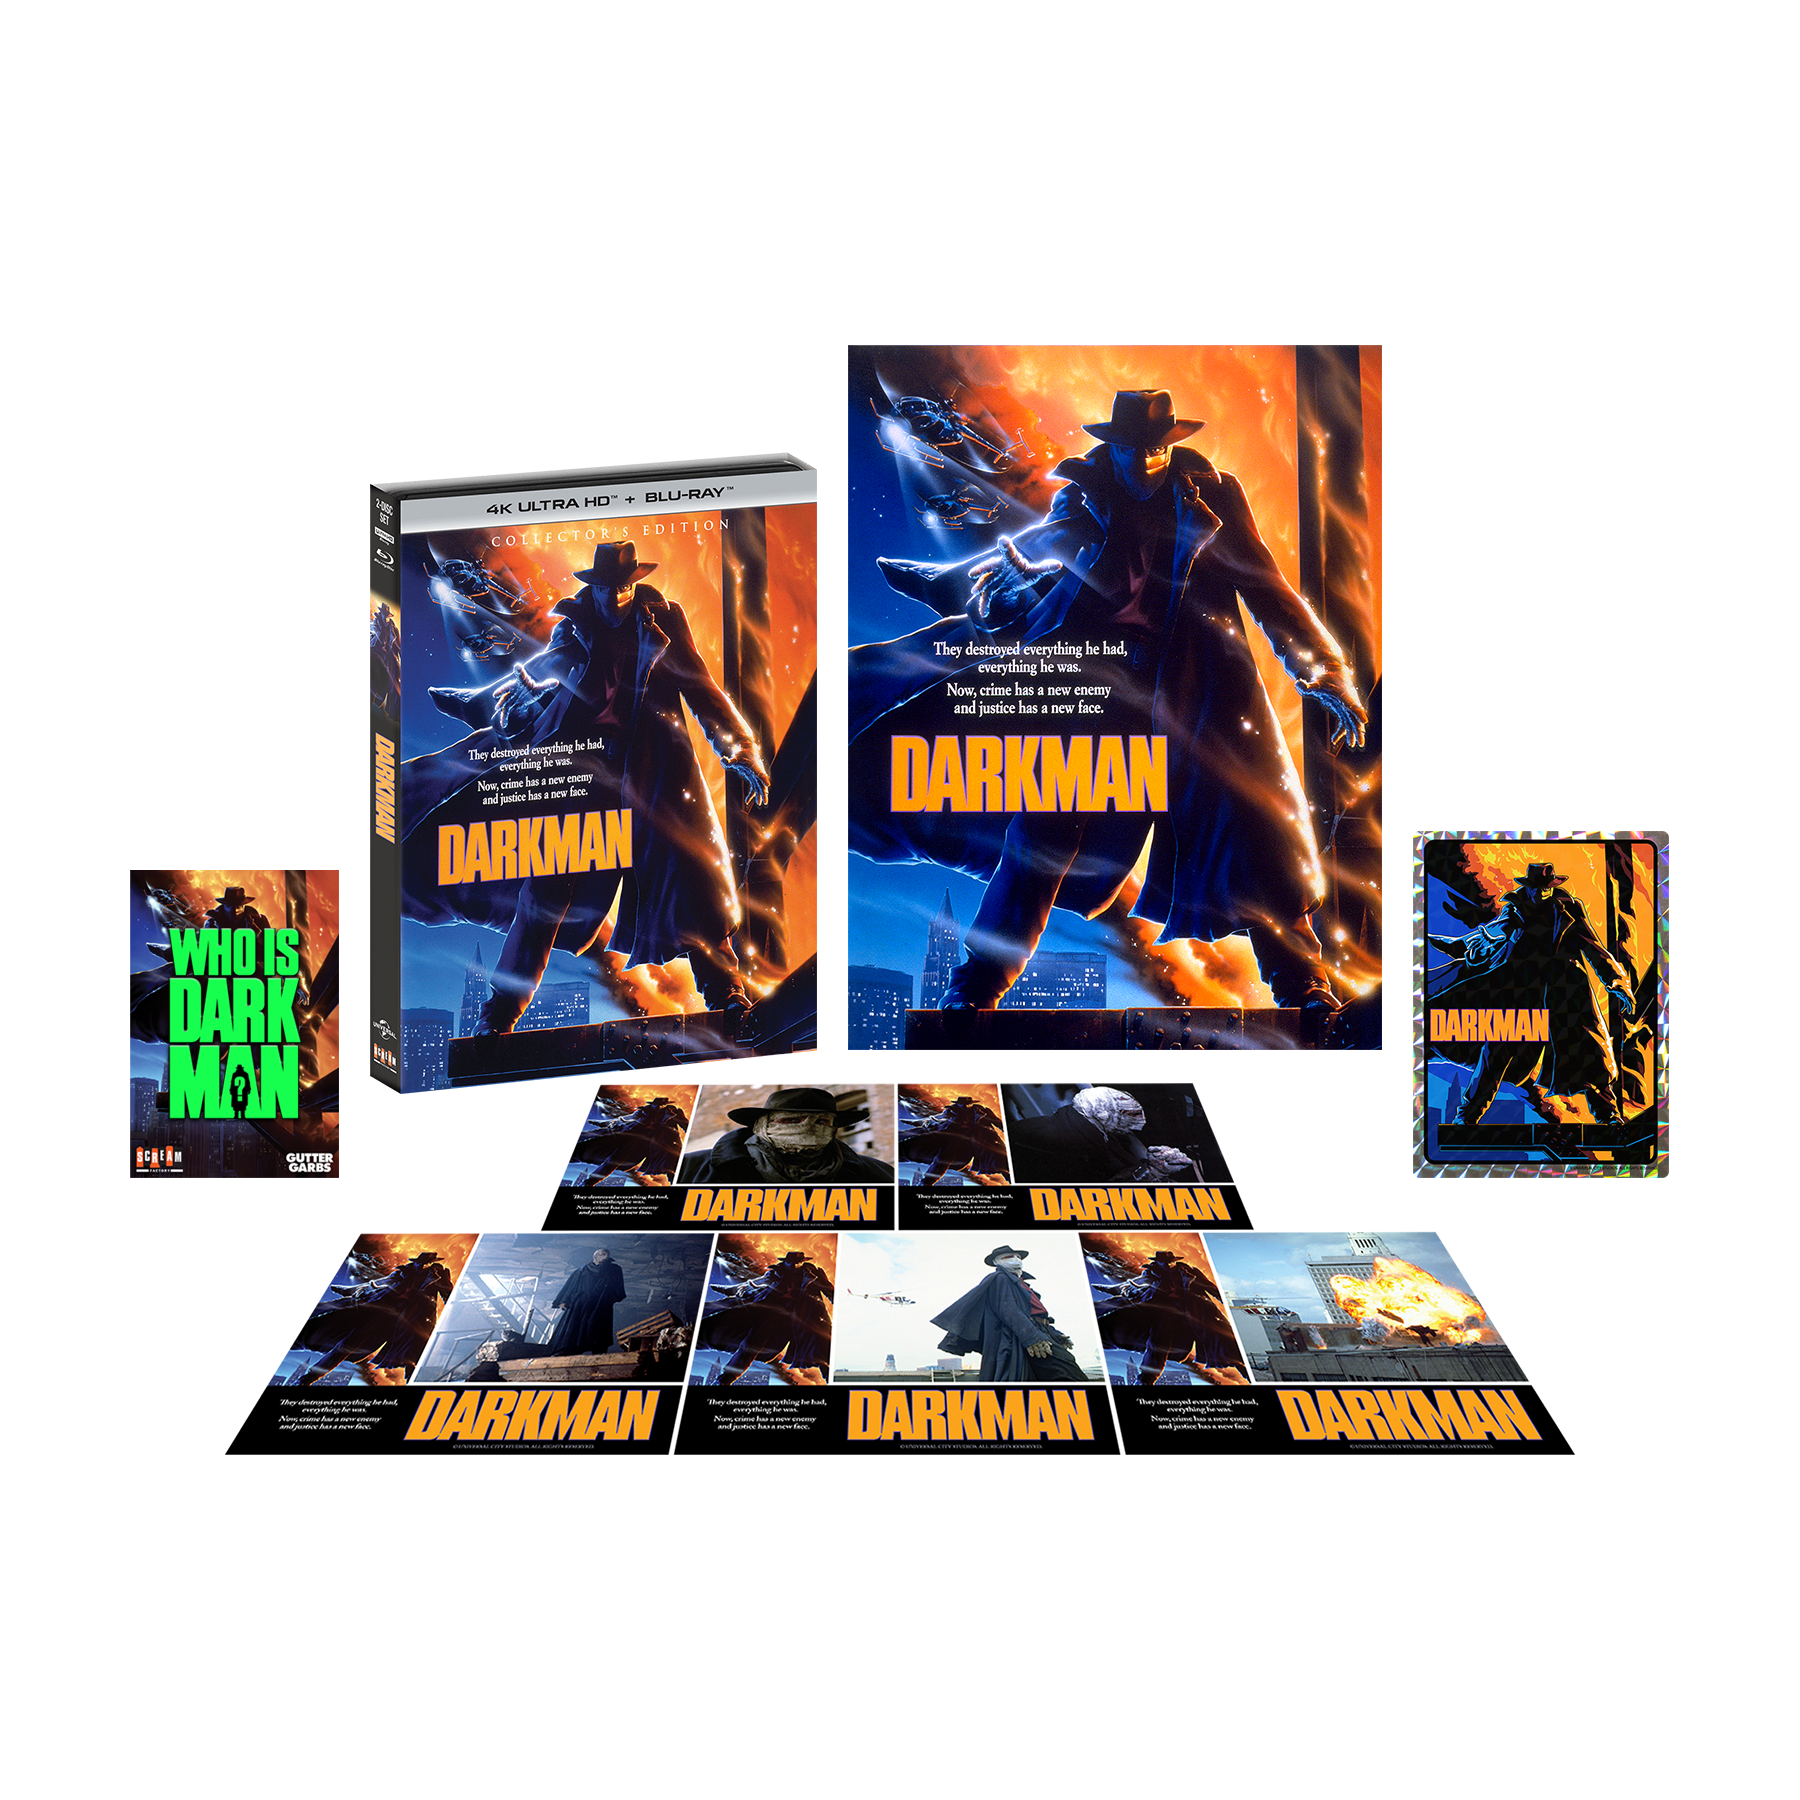 Darkman [Collector's Edition] + Pin + Prism Sticker + Poster + Lobby Cards - Shout! Factory